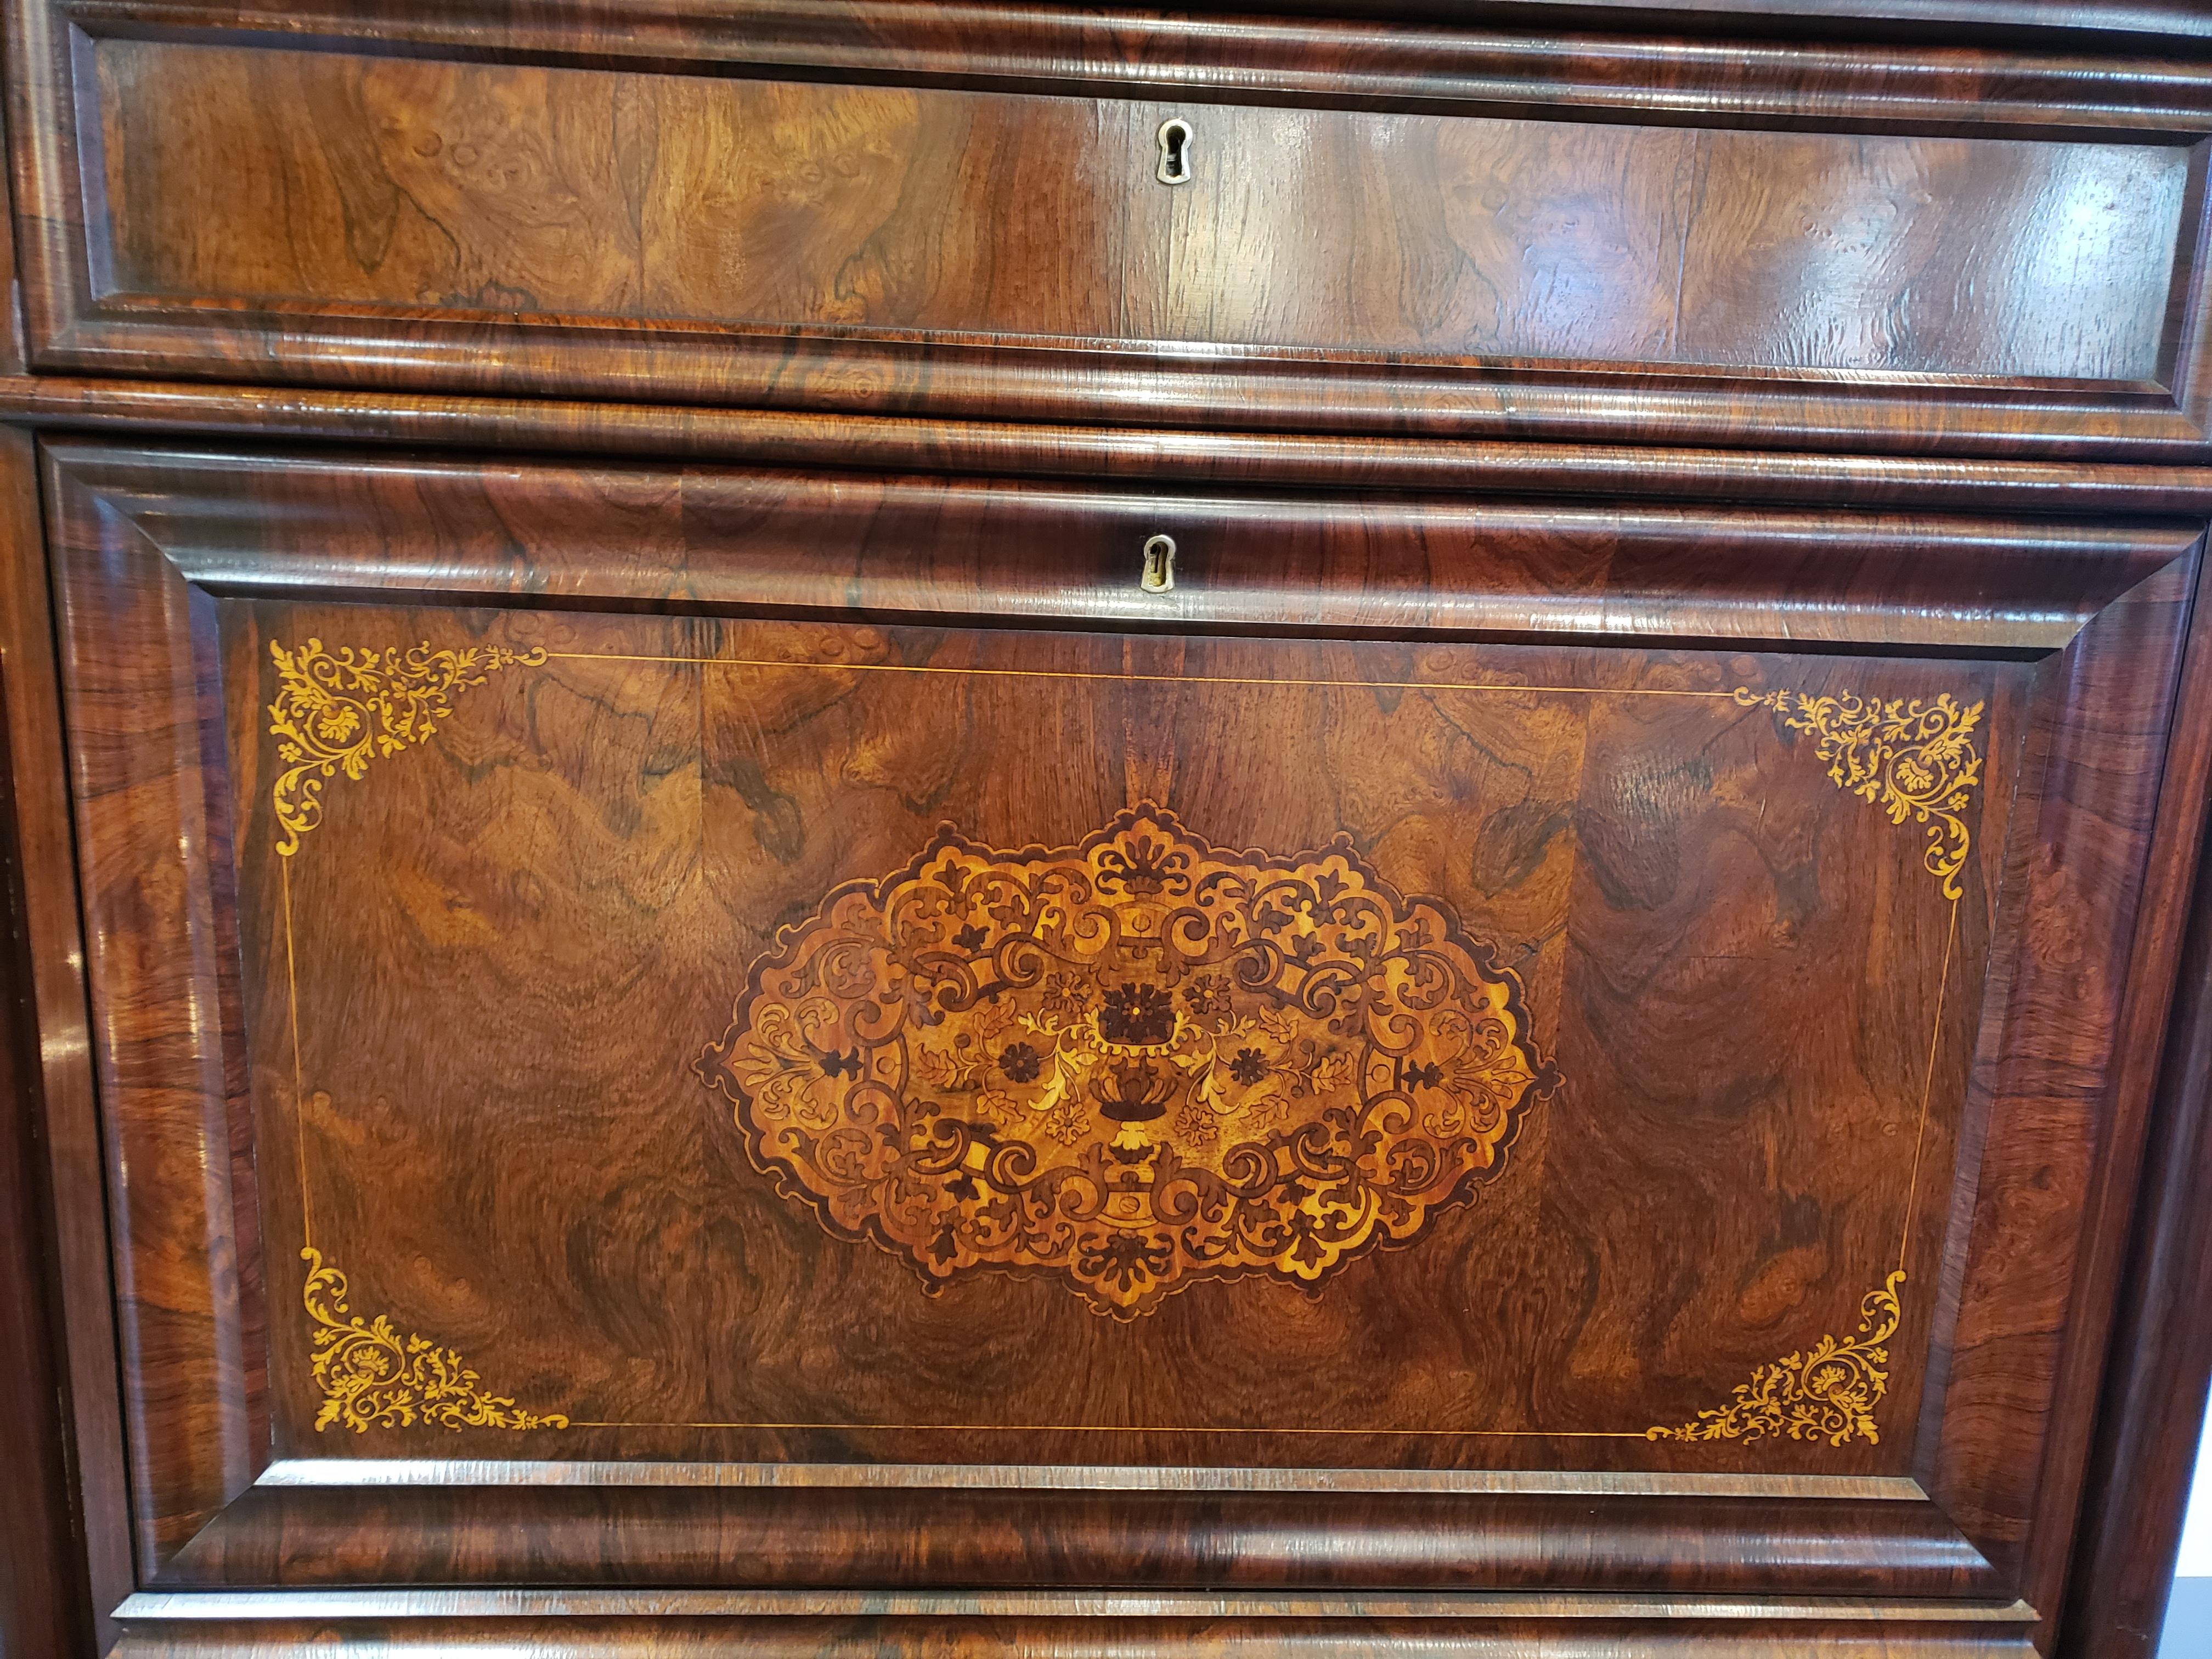 French Regency rosewood escritoire featuring satinwood interior drawers. This elegant piece consists of figural rosewood with mahogany and oak secondary woods. The center inlayed panel opens to display an elaborate interior with satinwood drawers,